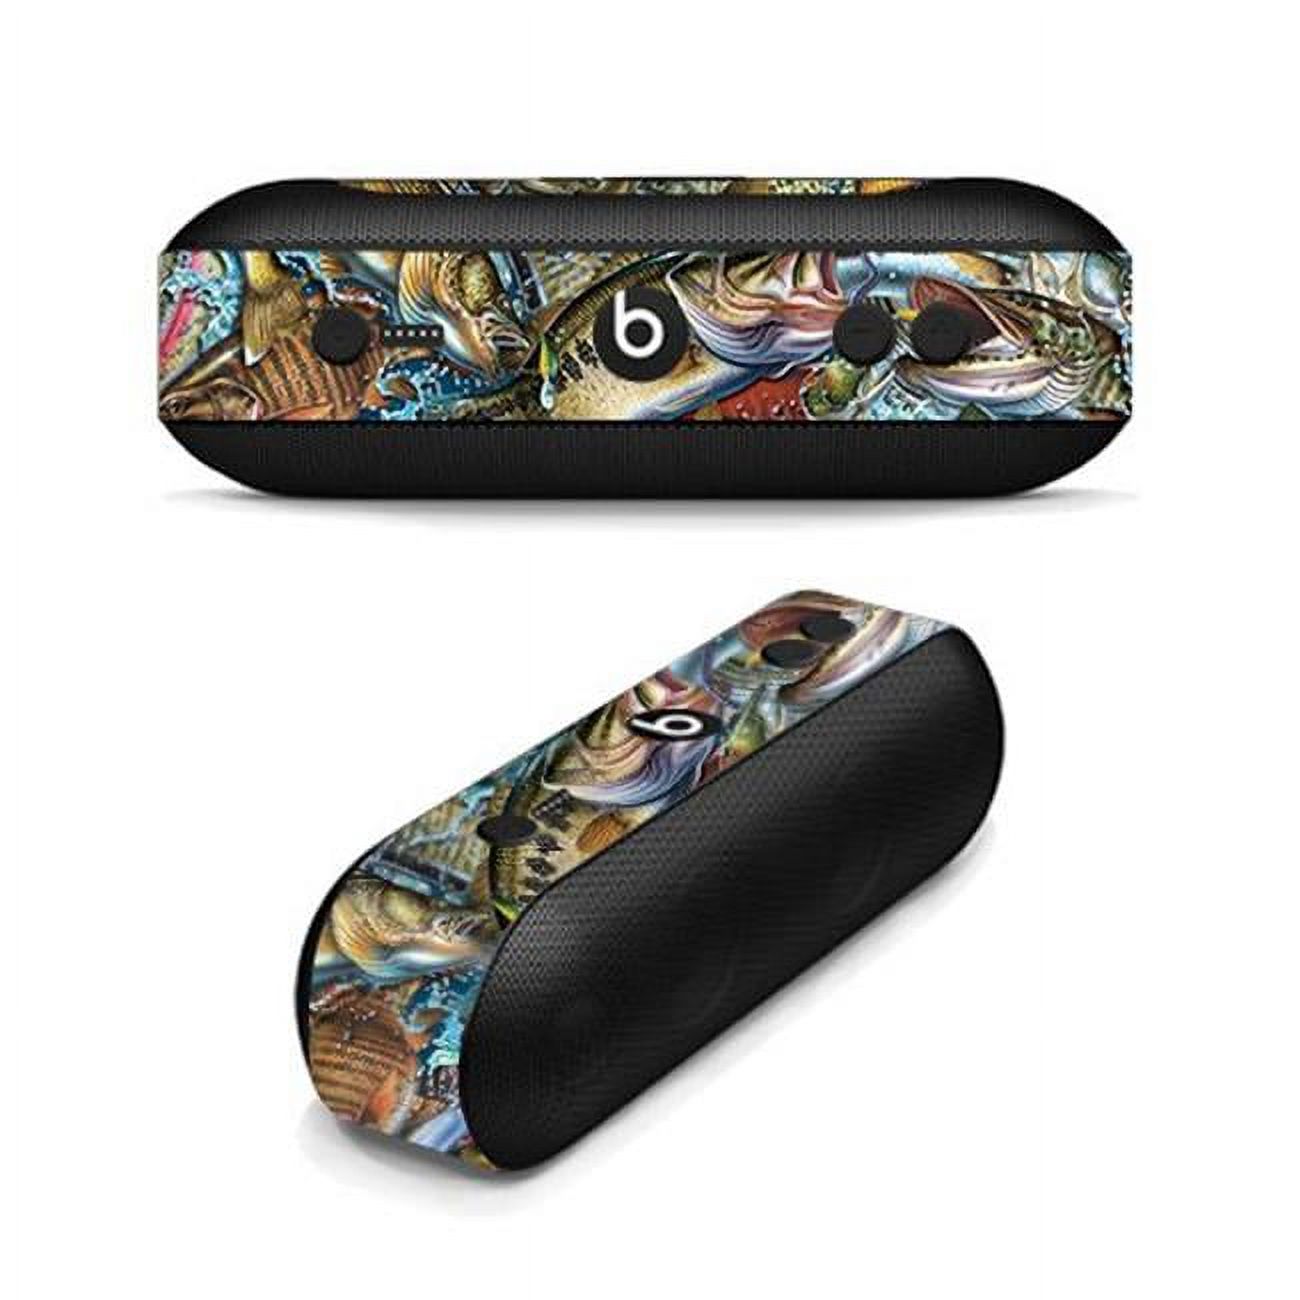 MightySkins BEPILLPL-Action Fish Puzzle Skin Decal Wrap for Beats by Dr. Dre Beats Pill Plus - Action Fish Puzzle - image 1 of 4